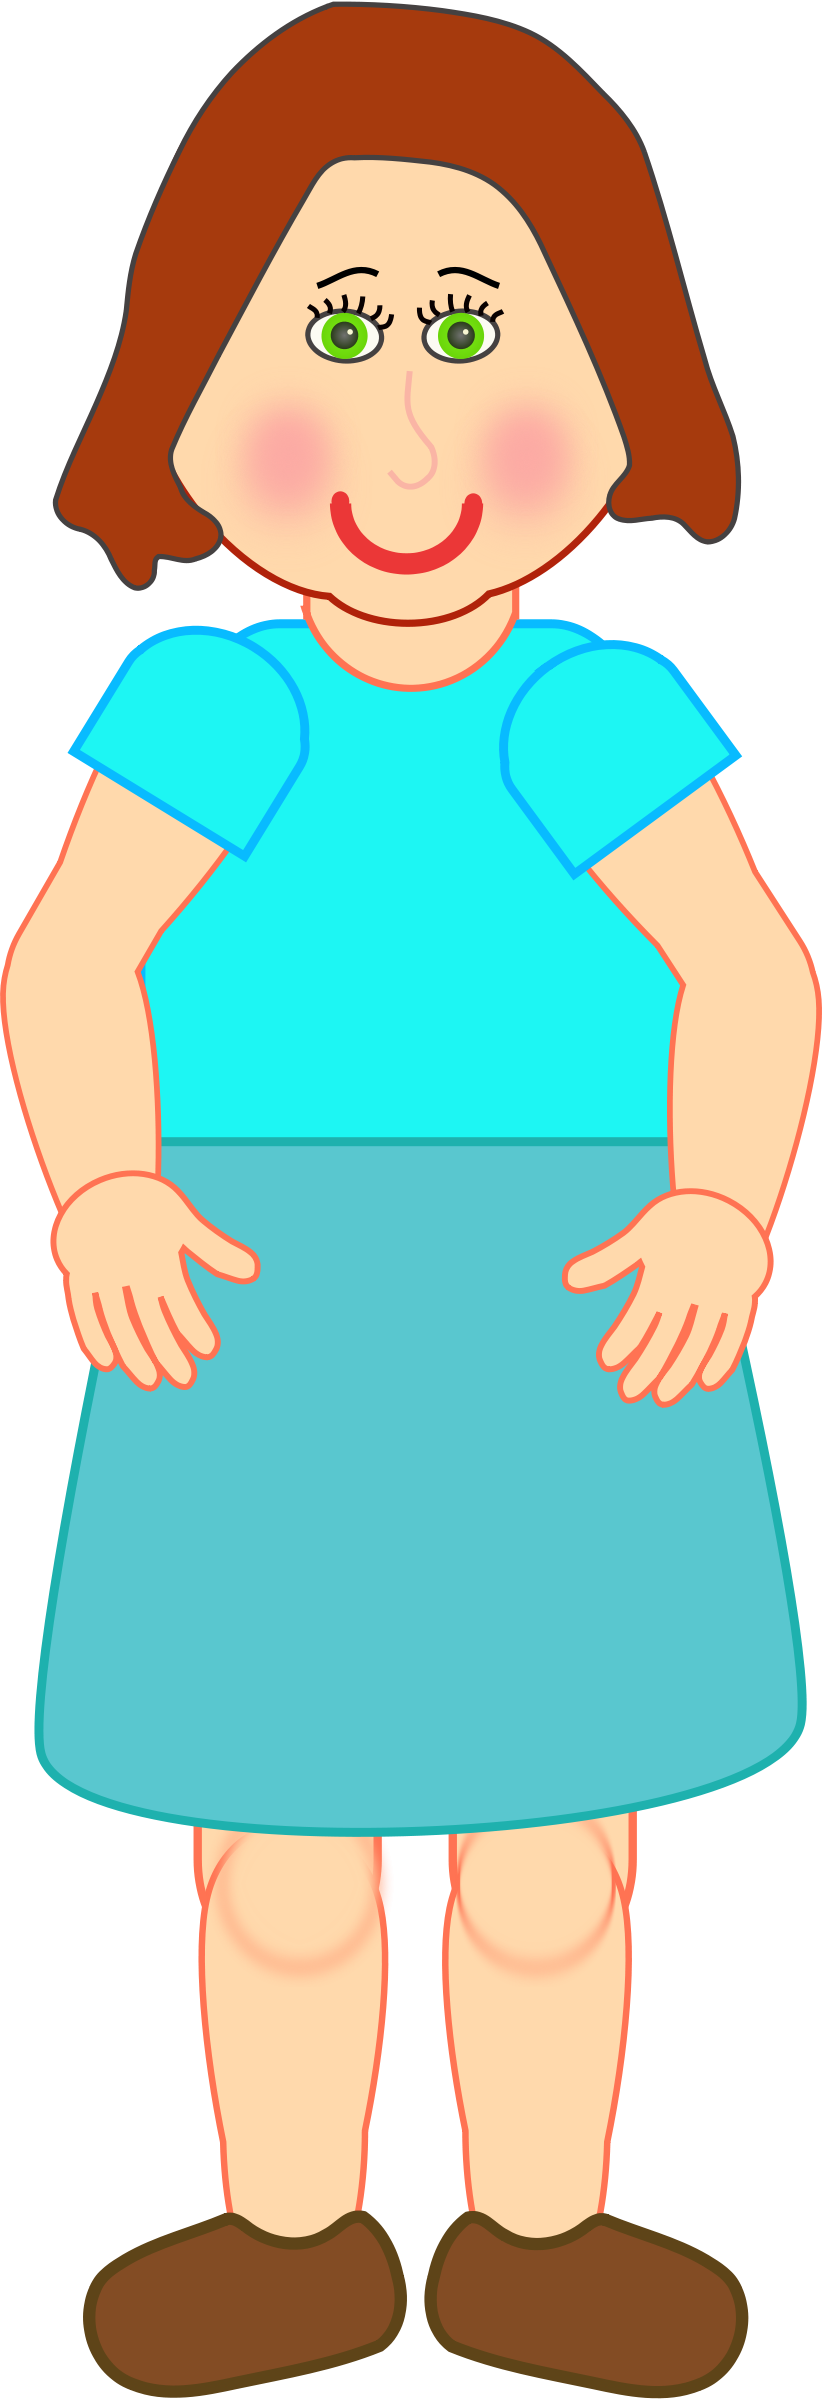 Woman Standing Clipart - Clipart Of A Woman Standing (958x2794)